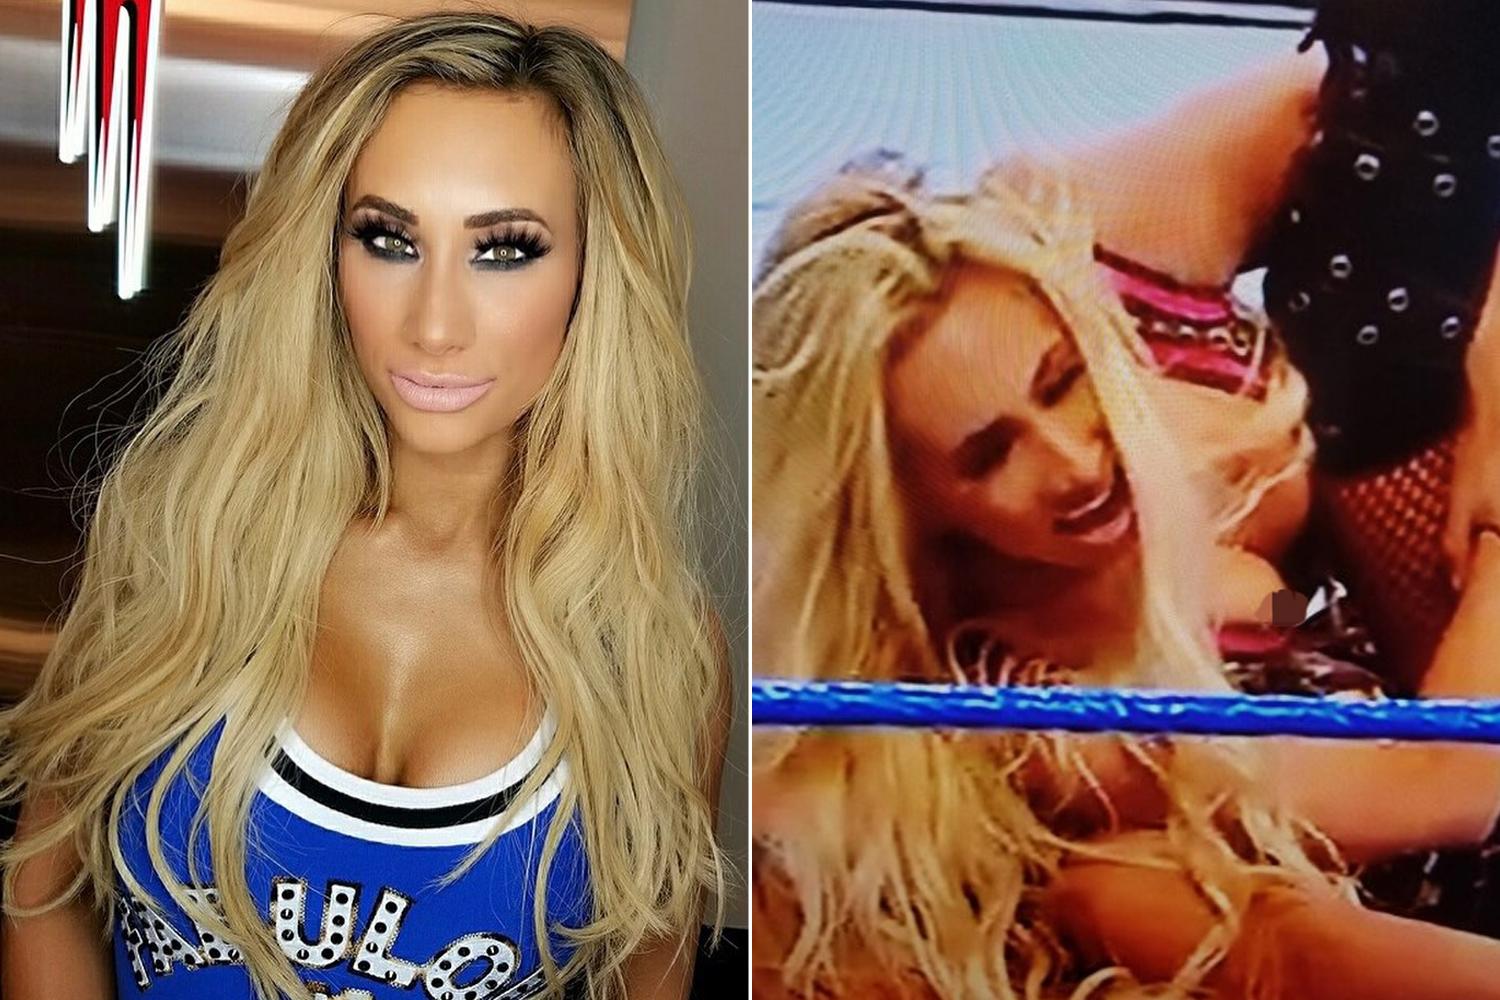 donna hatt recommends wwe diva carmella naked pic